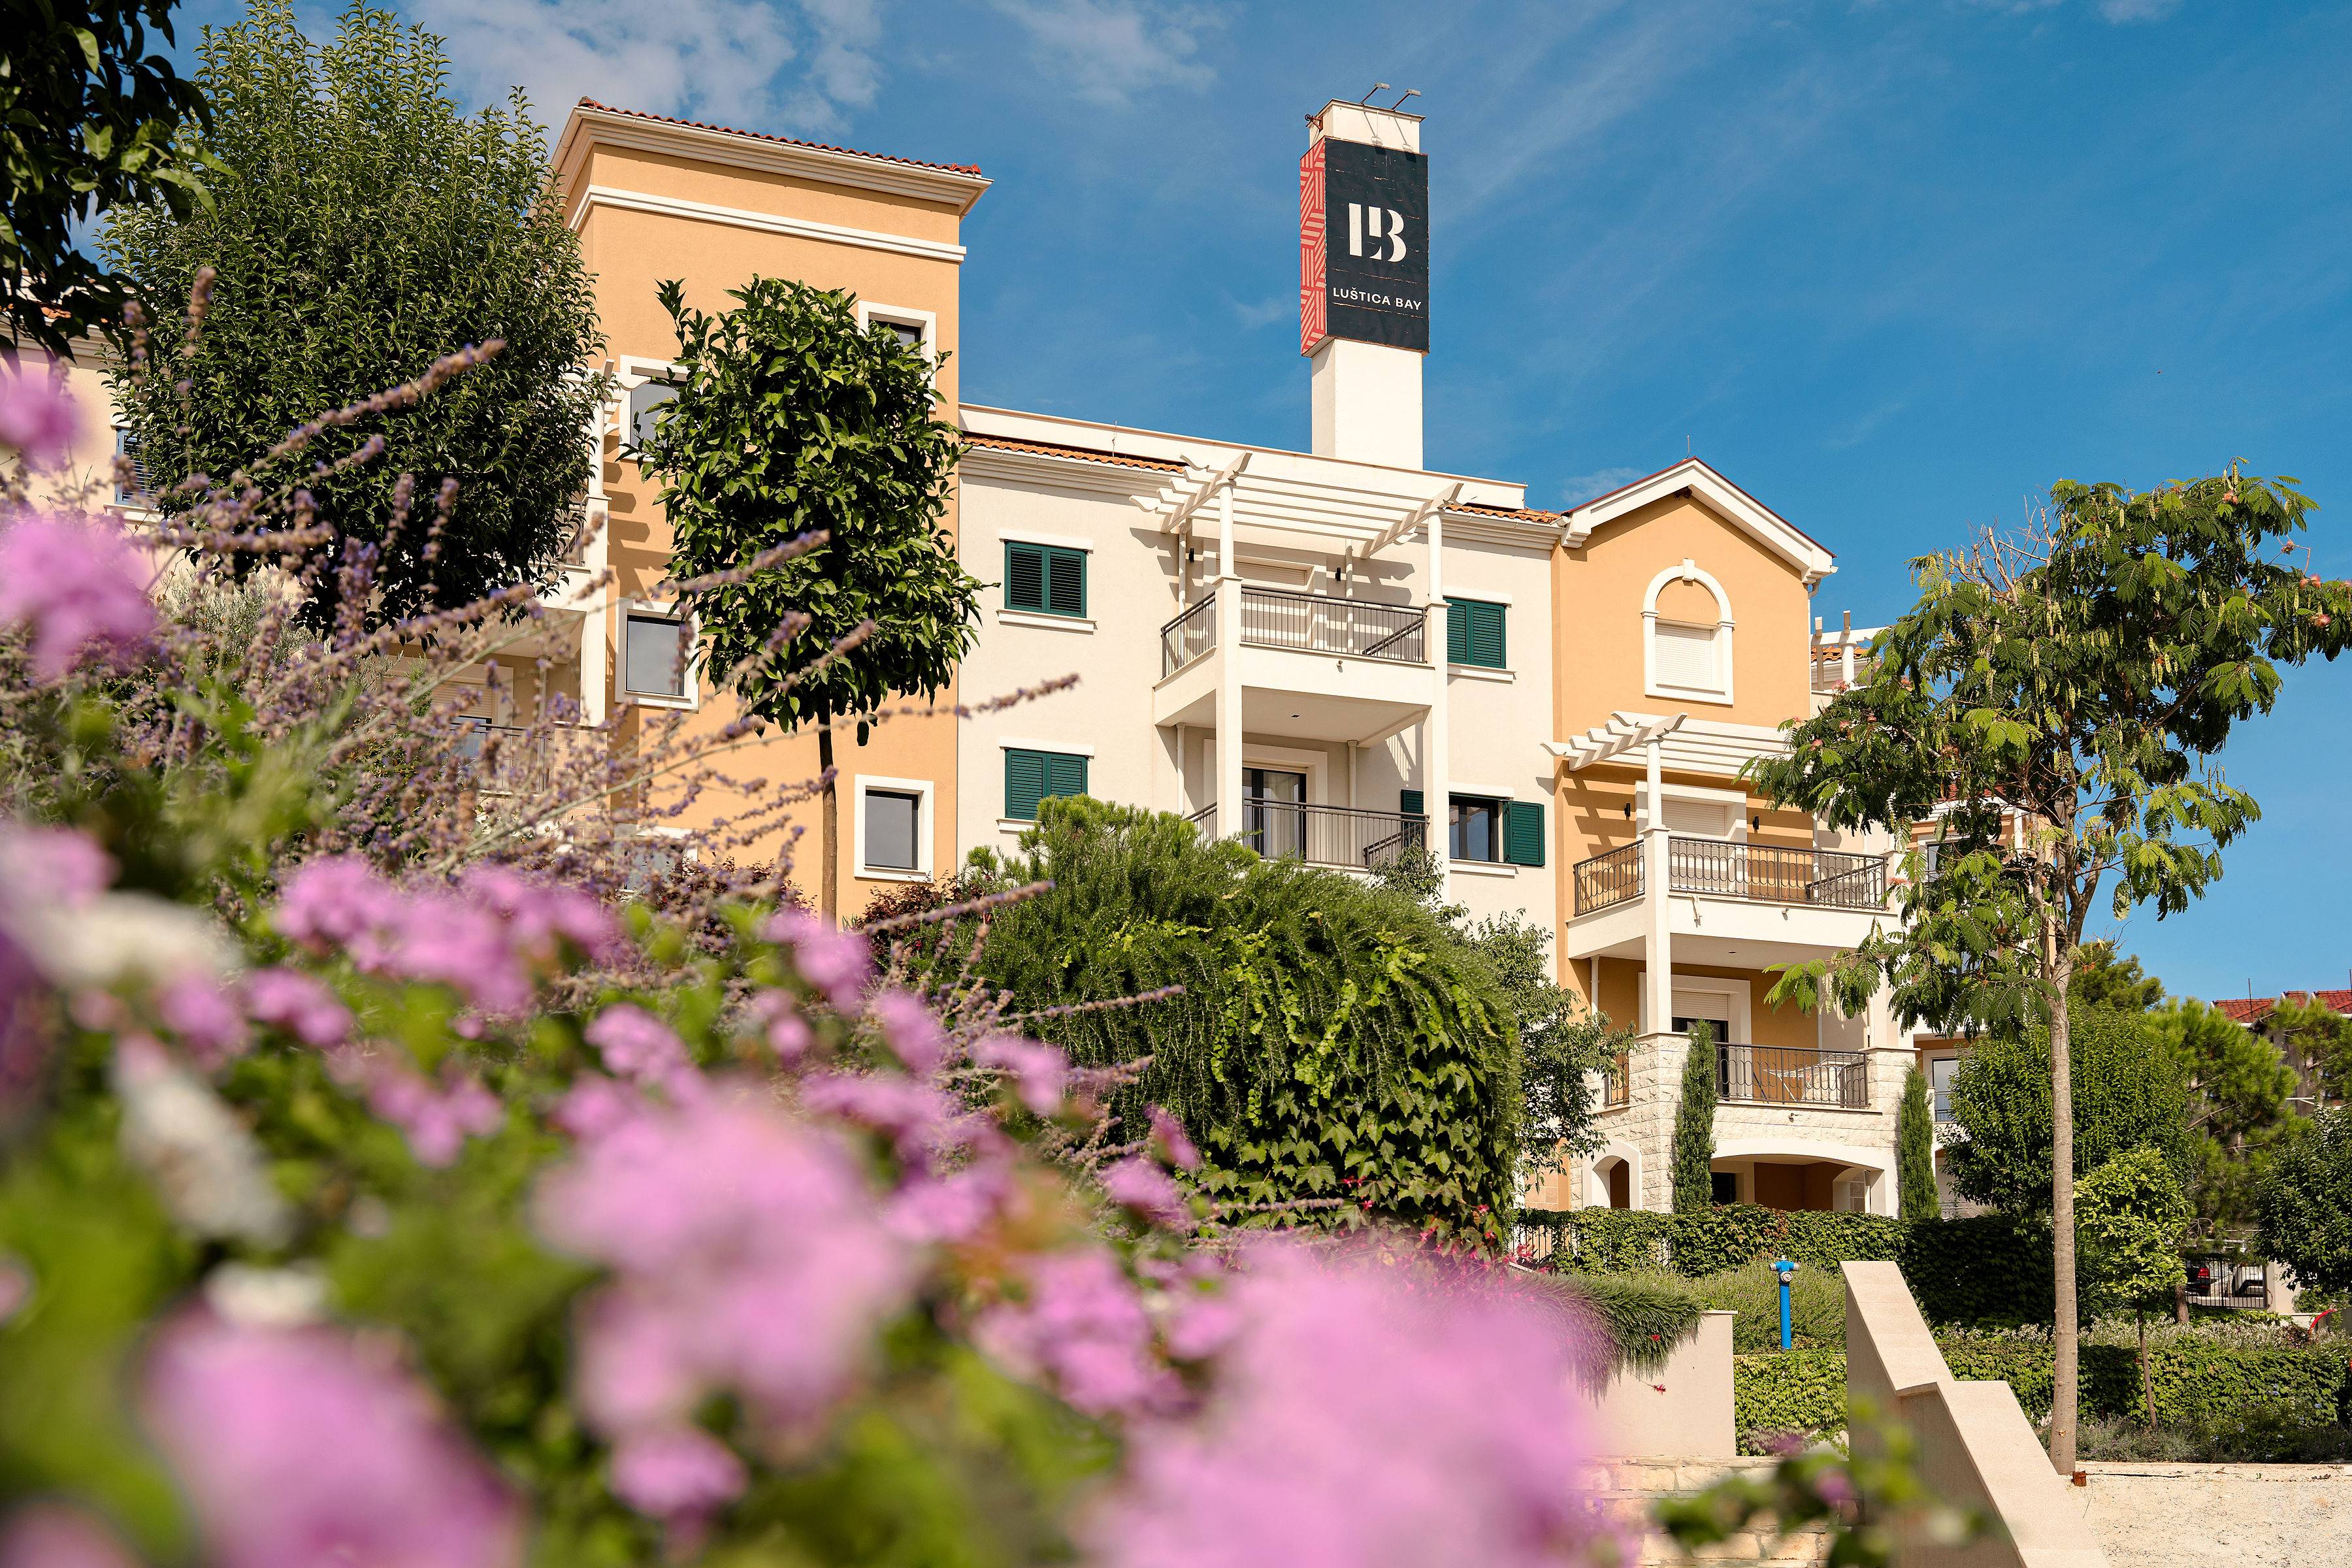 Lustica Bay Centrale | 2 Bedroom Appartment | Montenegro